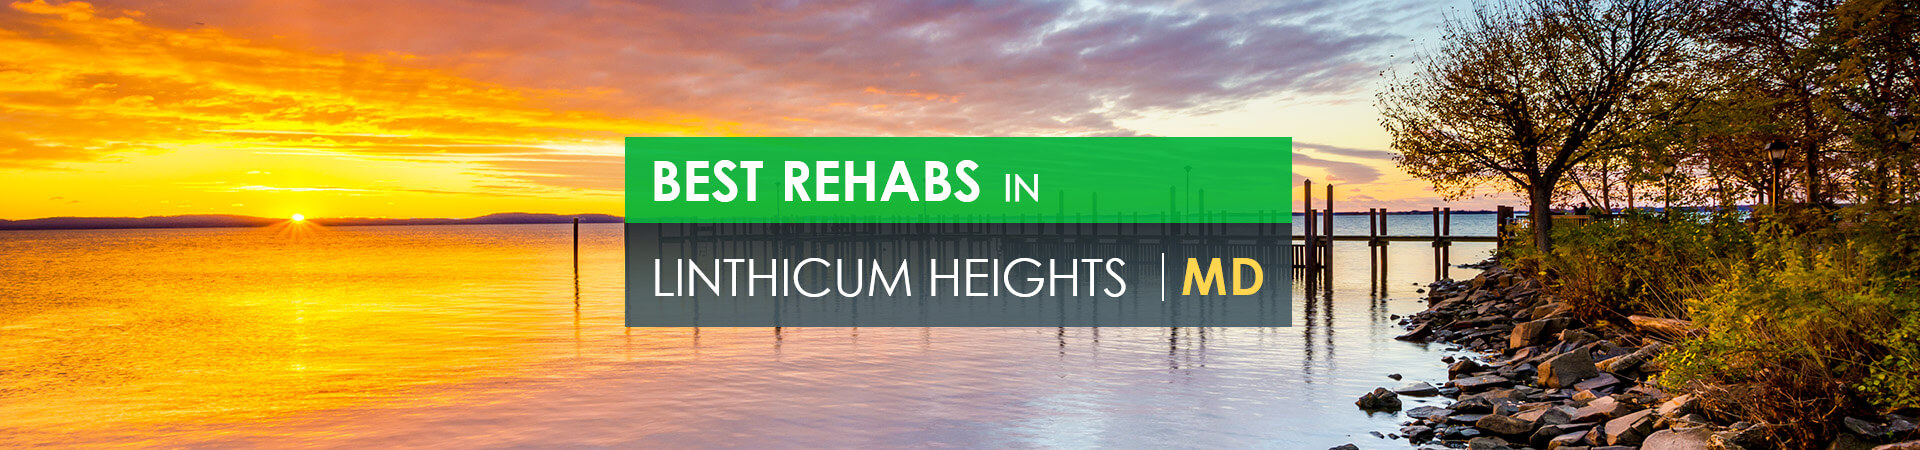 Best rehabs in Linthicum Heights, MD